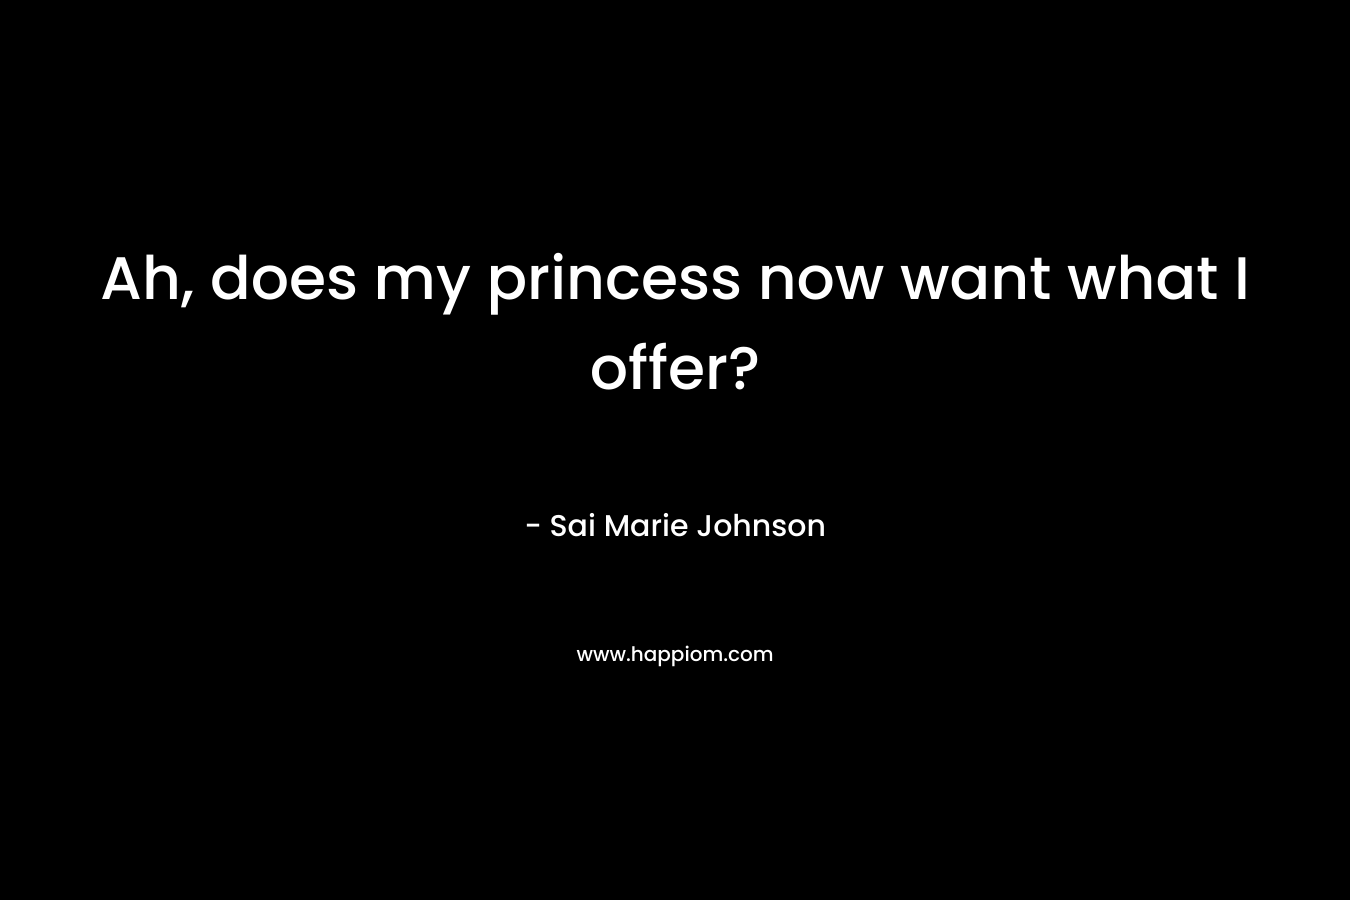 Ah, does my princess now want what I offer?